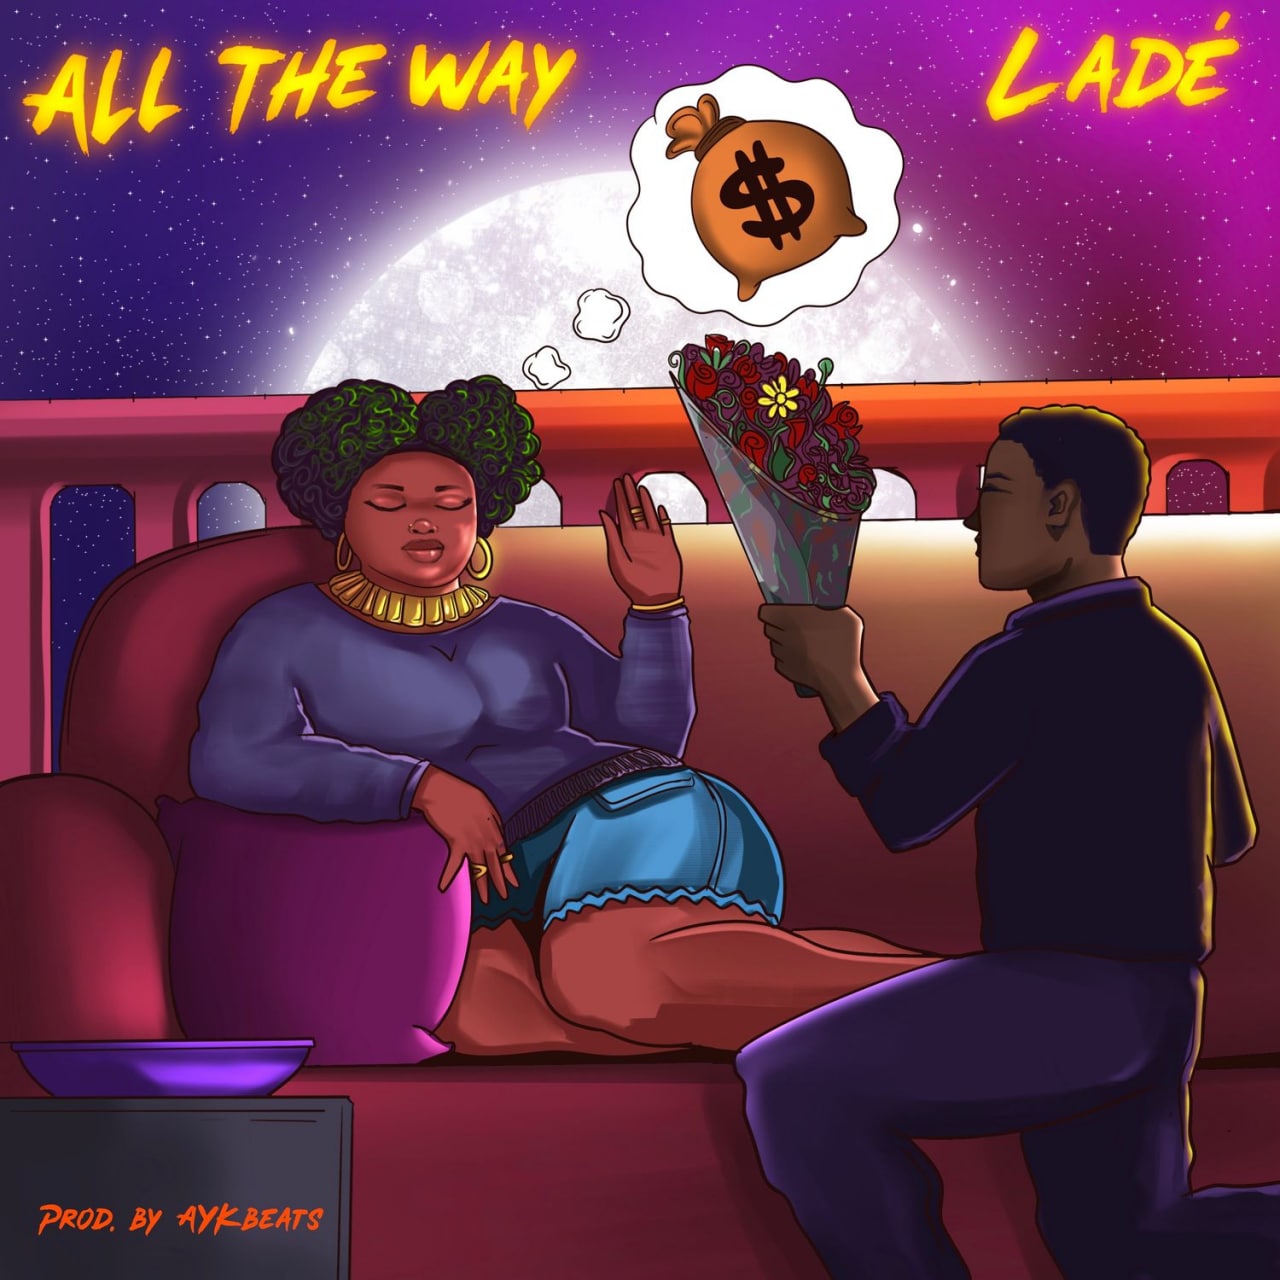 All The Way - Lade